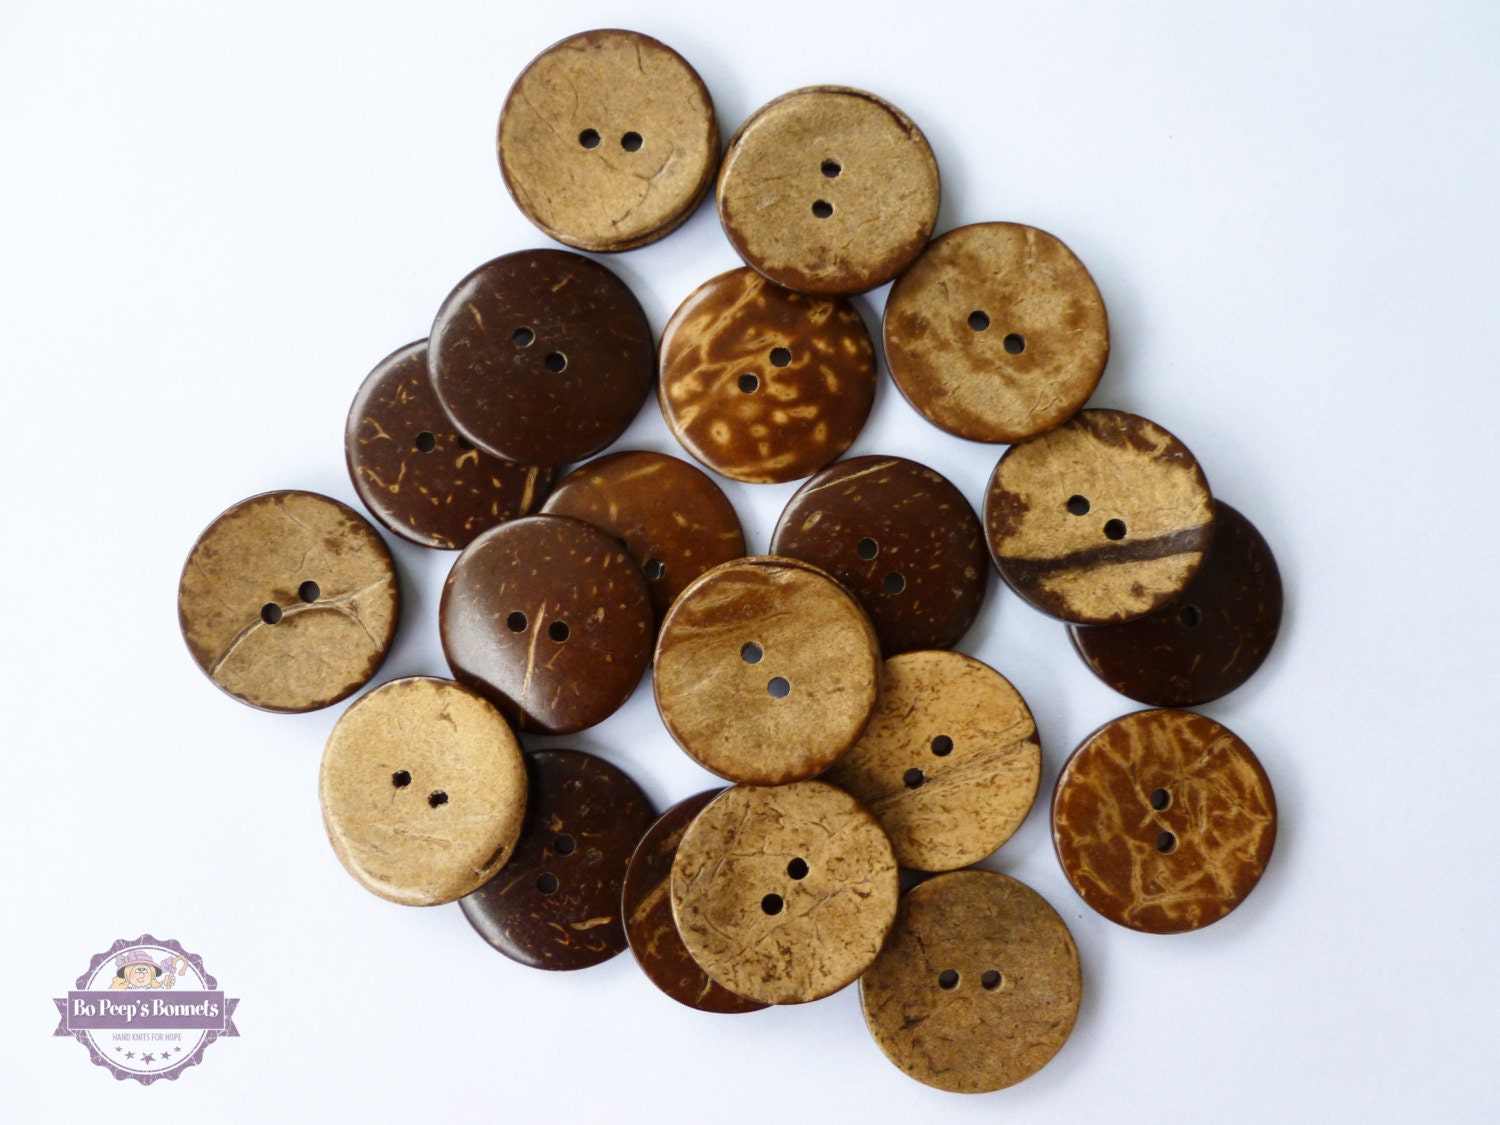 20 coconut buttons 1 inch 25mm 2.5 cm coconut shell buttons